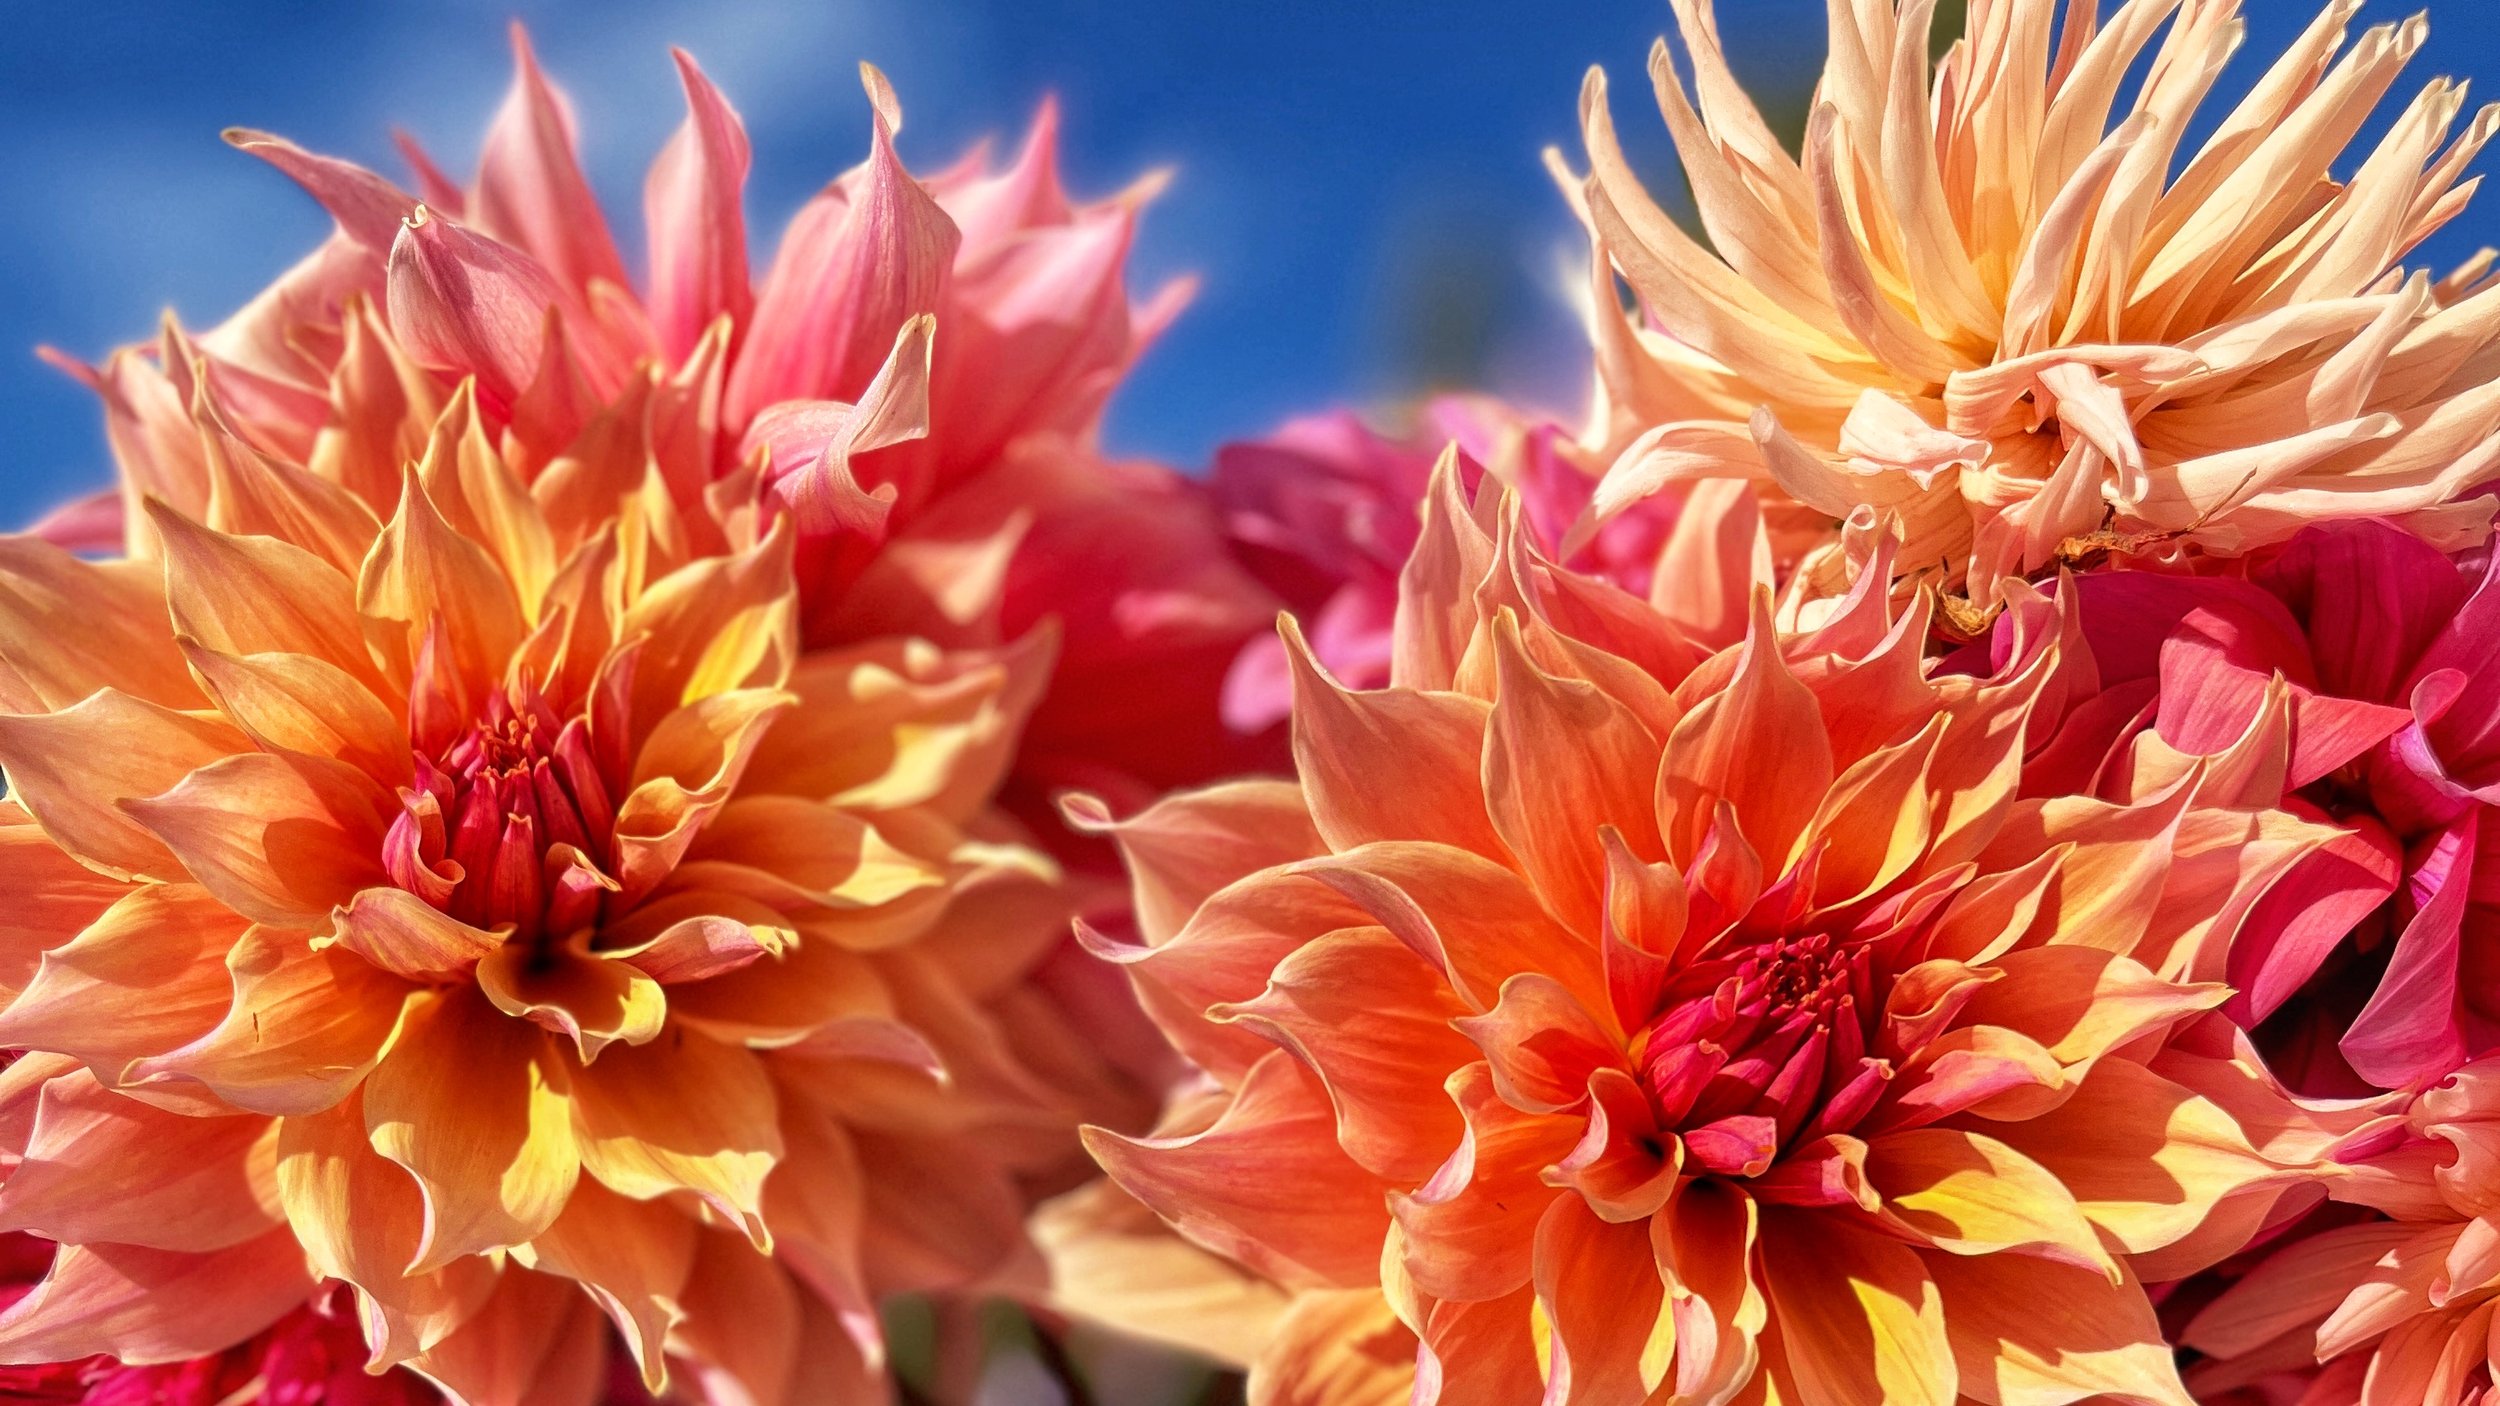 Rosy-Fingered Dawn Dahlia Collection